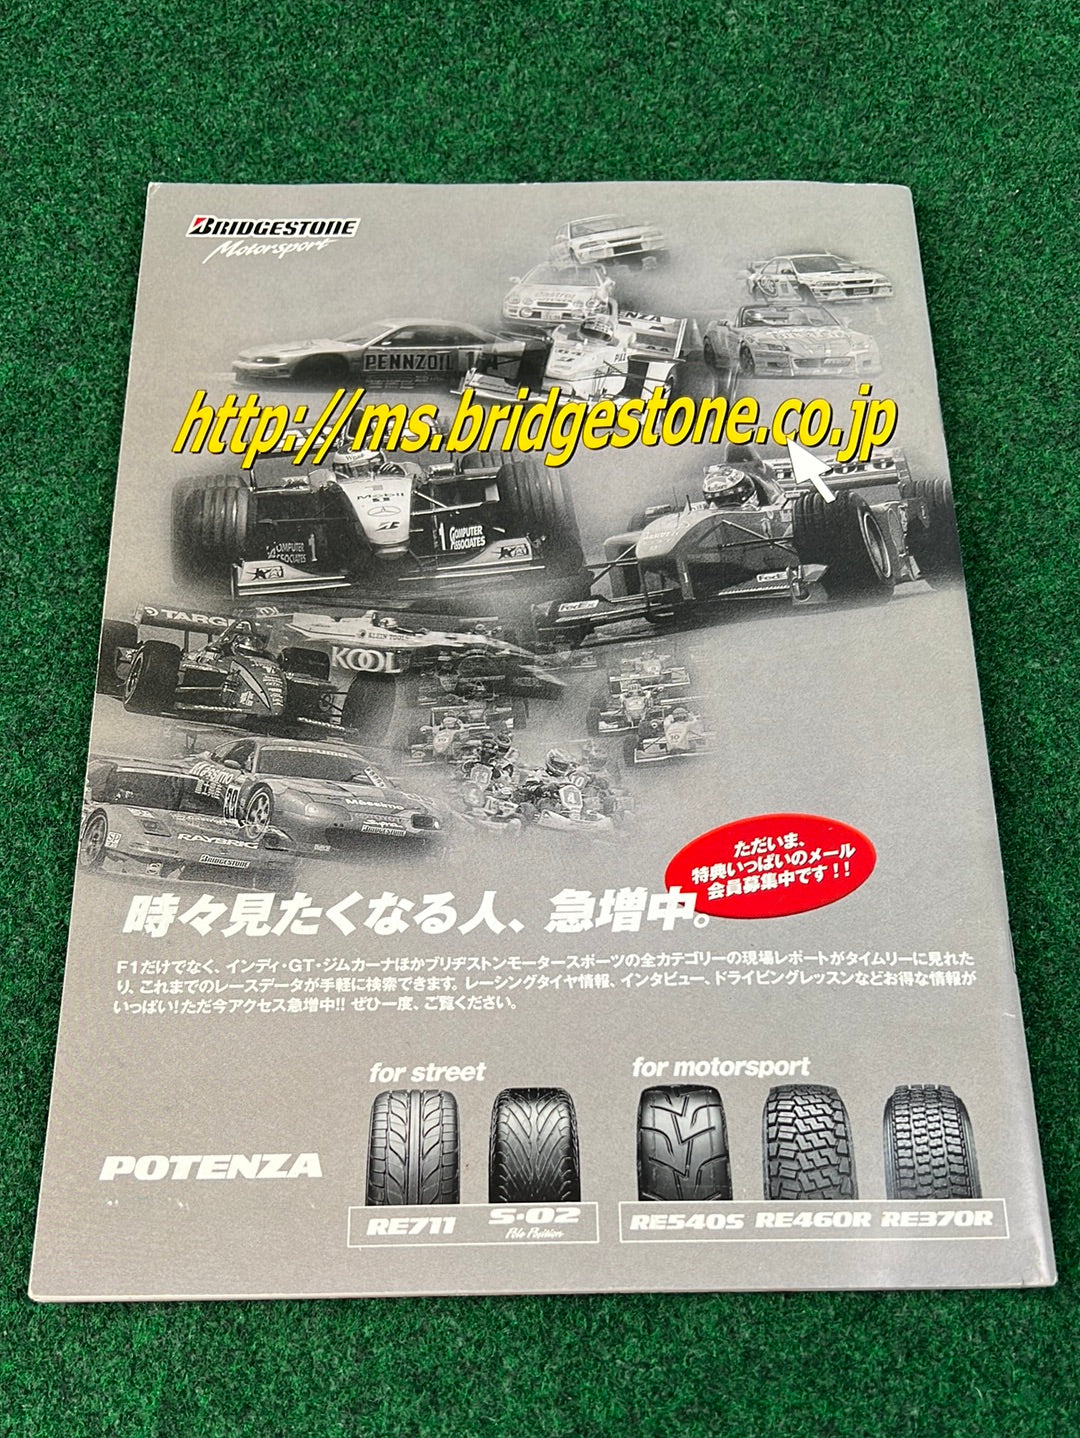 JGTC - 2000 All Japan GT Championship Round 3 at SUGO Race Event Program